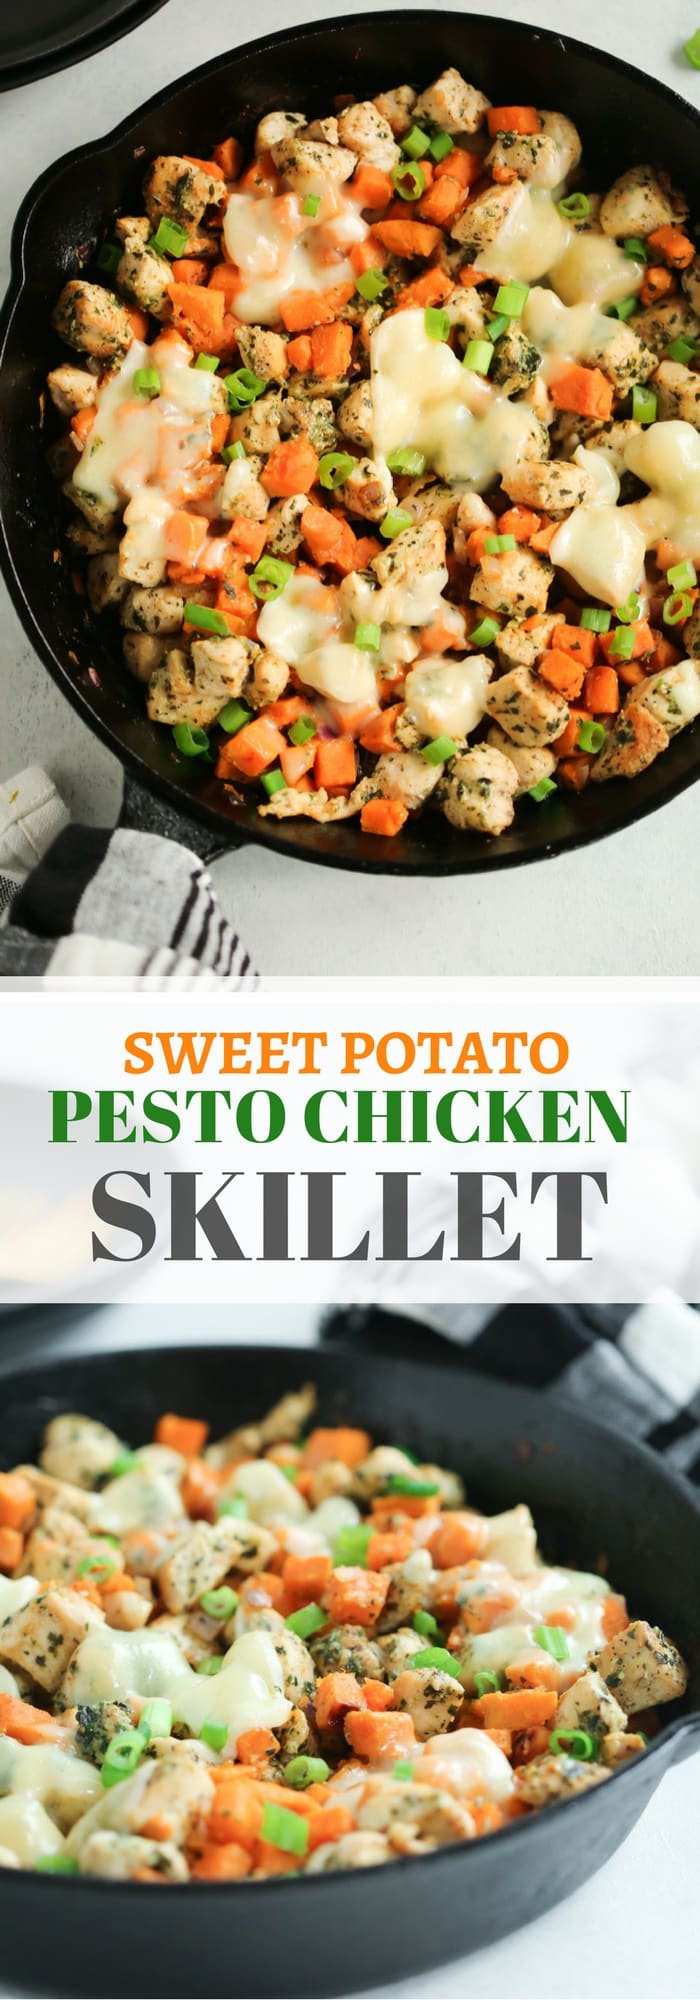 Sweet Potato Chicken Pesto Skillet - Sweet Potato Pesto Chicken Skillet is the easiest recipe you can prepare for dinner and it's low-carb, gluten-free and one-pan, which is great to clean up! 